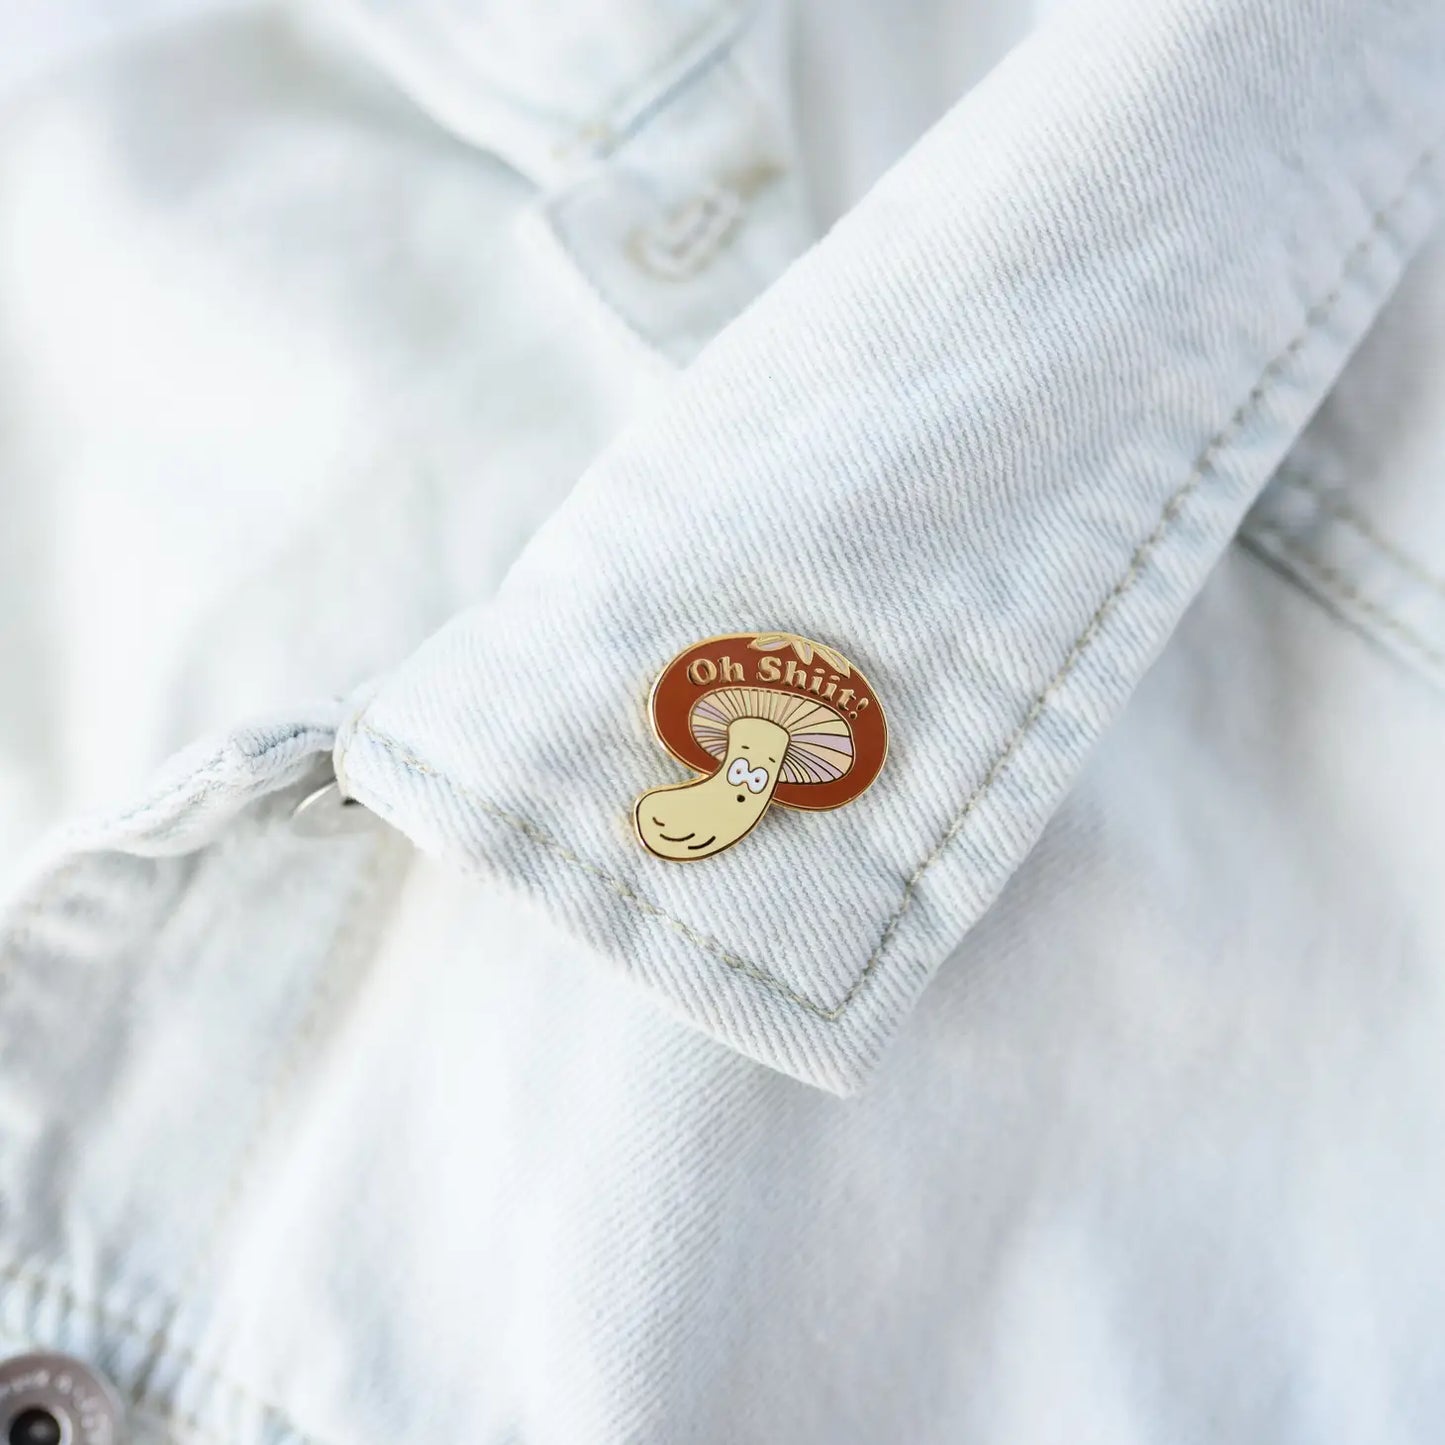 Mushroom enamel pin -- image is a shiitake mushroom with it's mouth open. On the mushroom cap it reads "Oh Shiit!" 